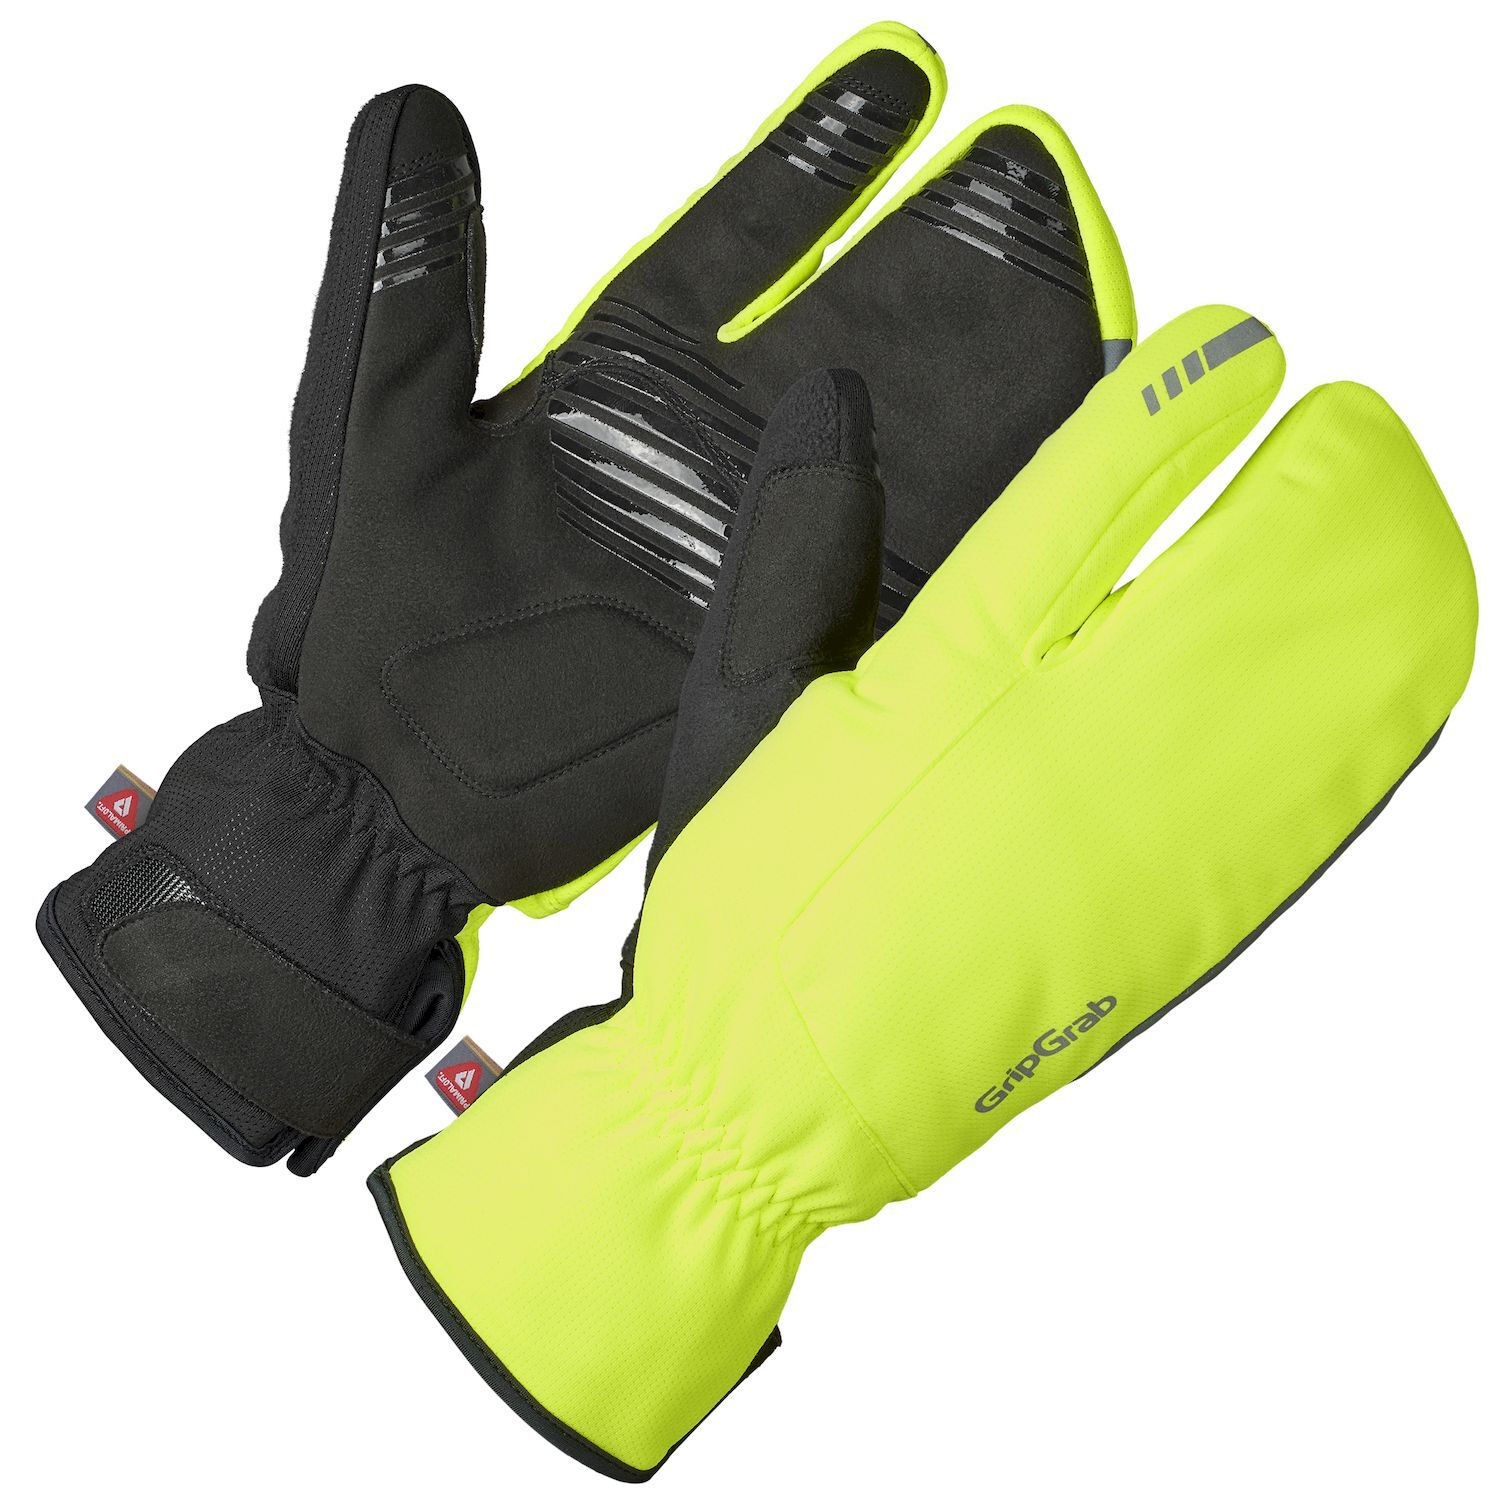 GripGrab Nordic 2 Windproof Deep Winter Lobster Gloves - Guanti ciclismo